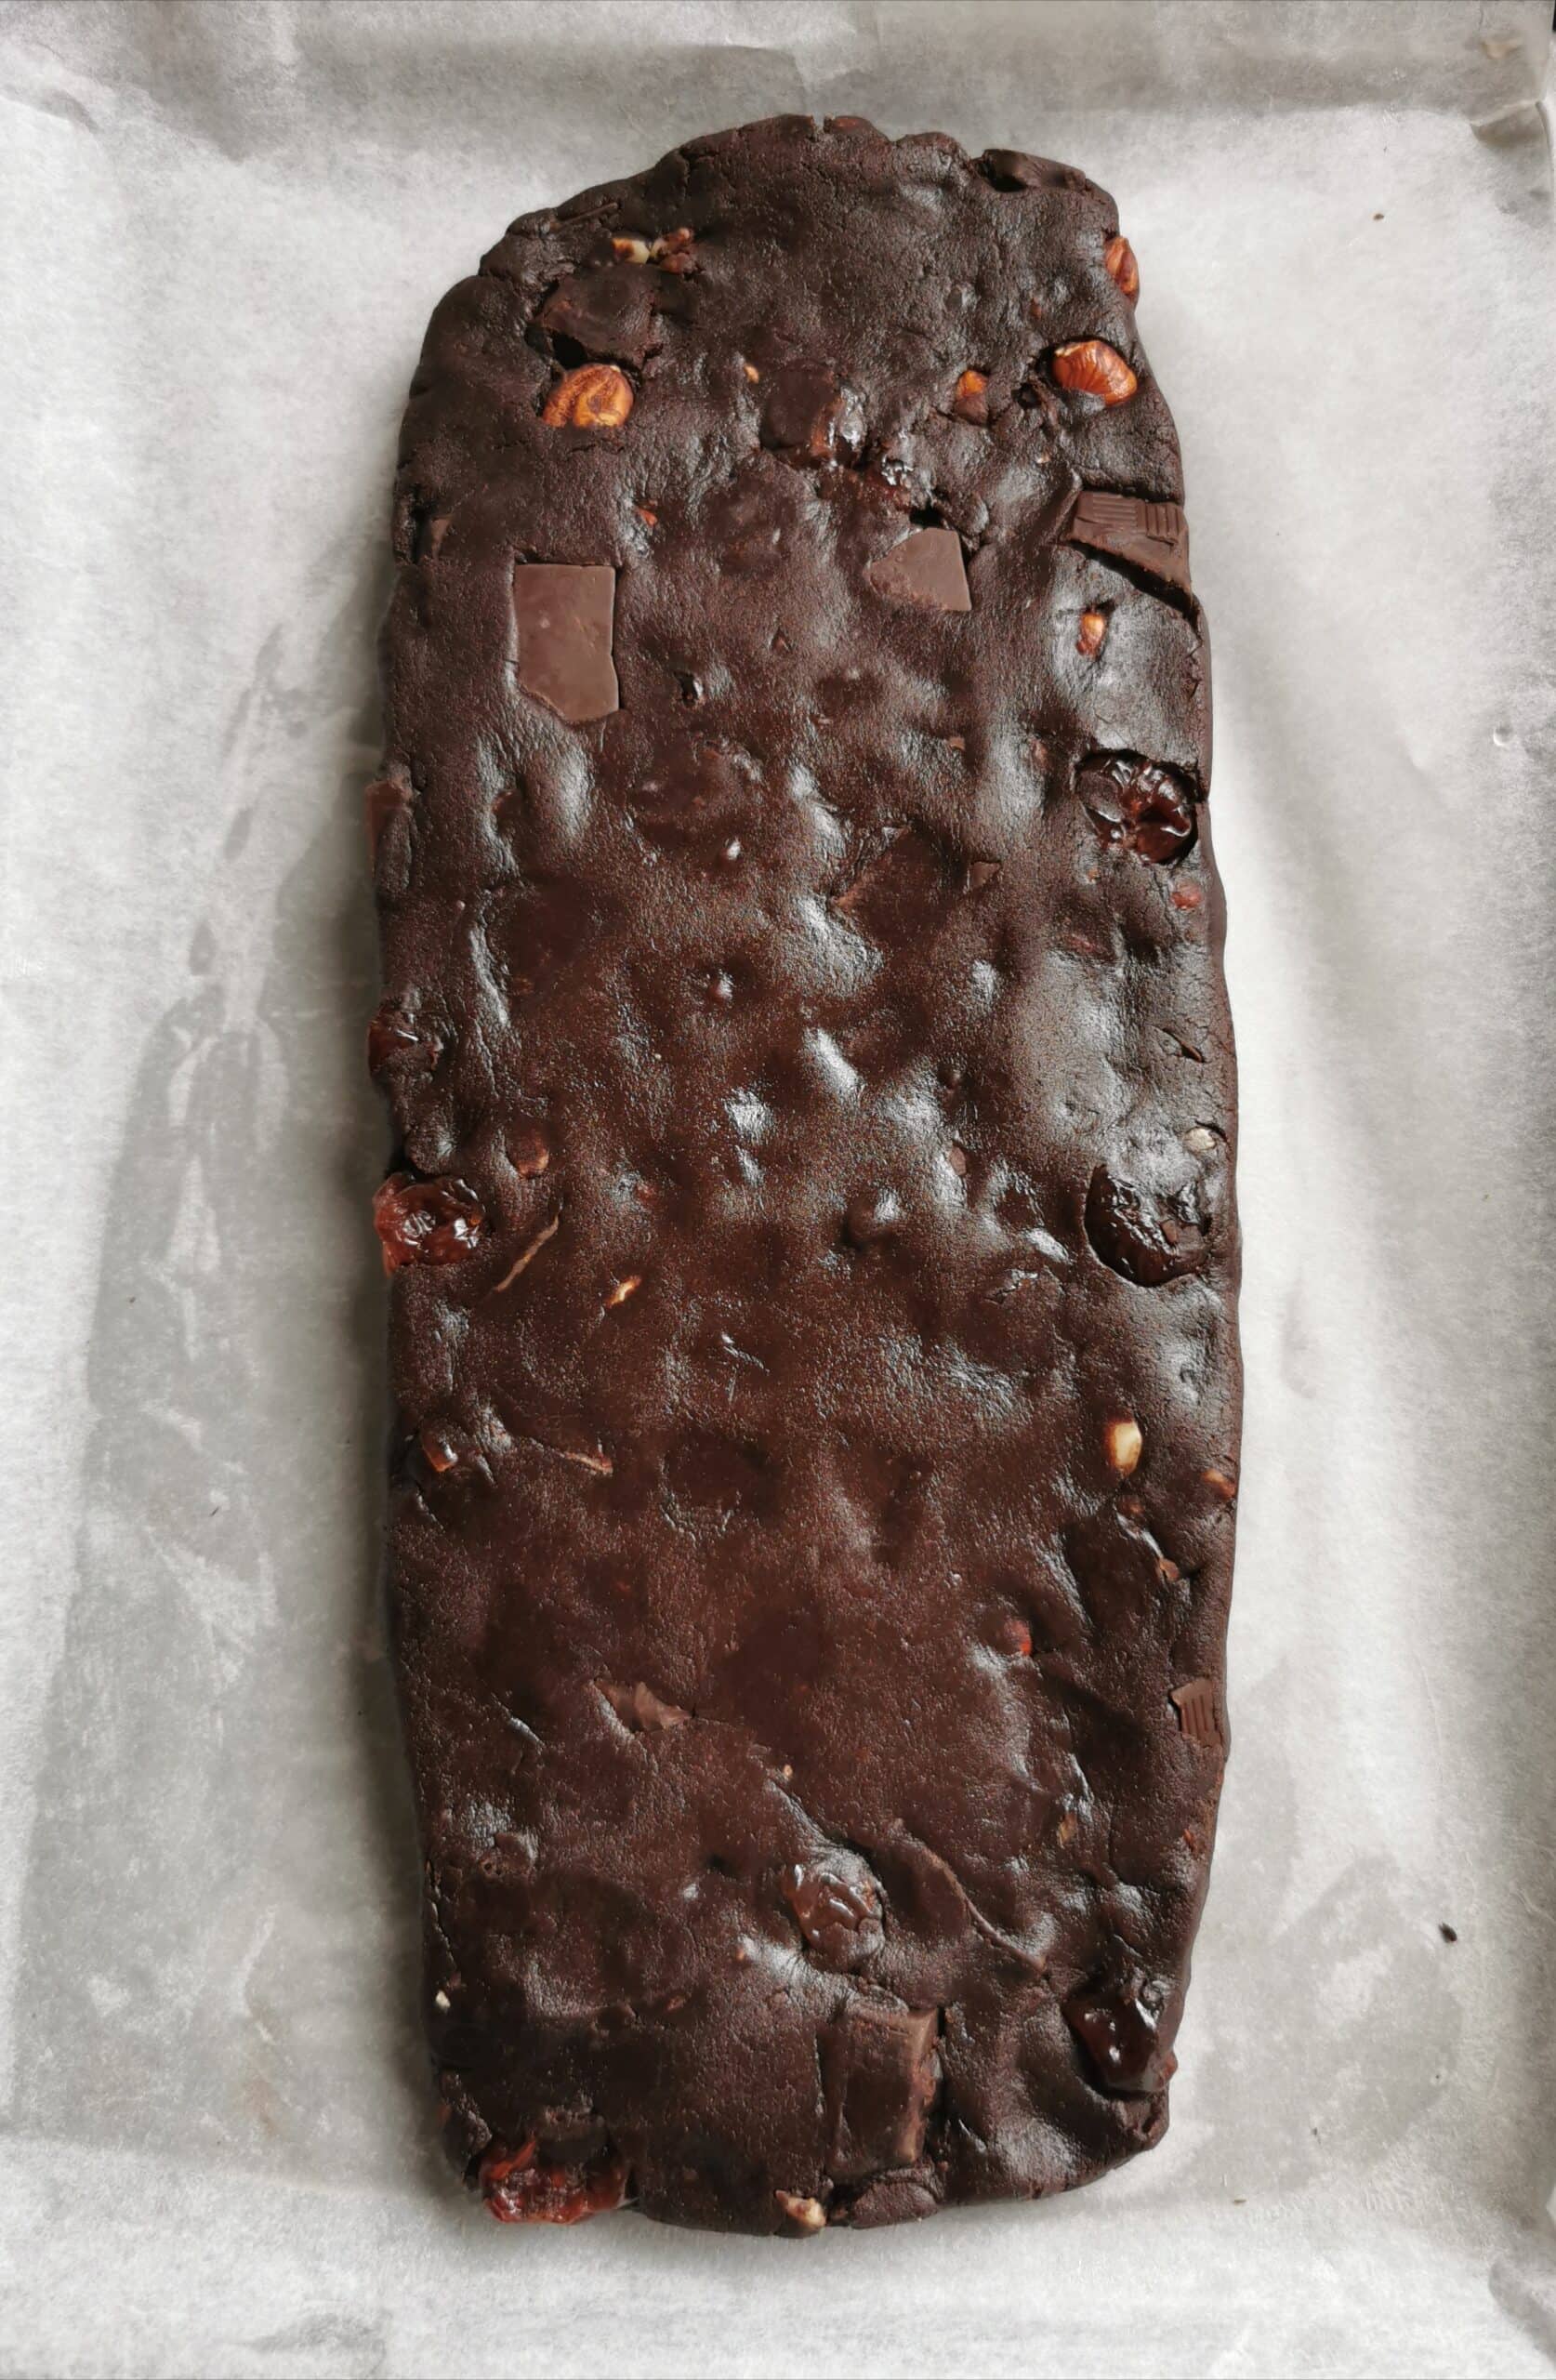 A chocolate biscotti dough shaped into a rectangle on a parchment lined baking sheet